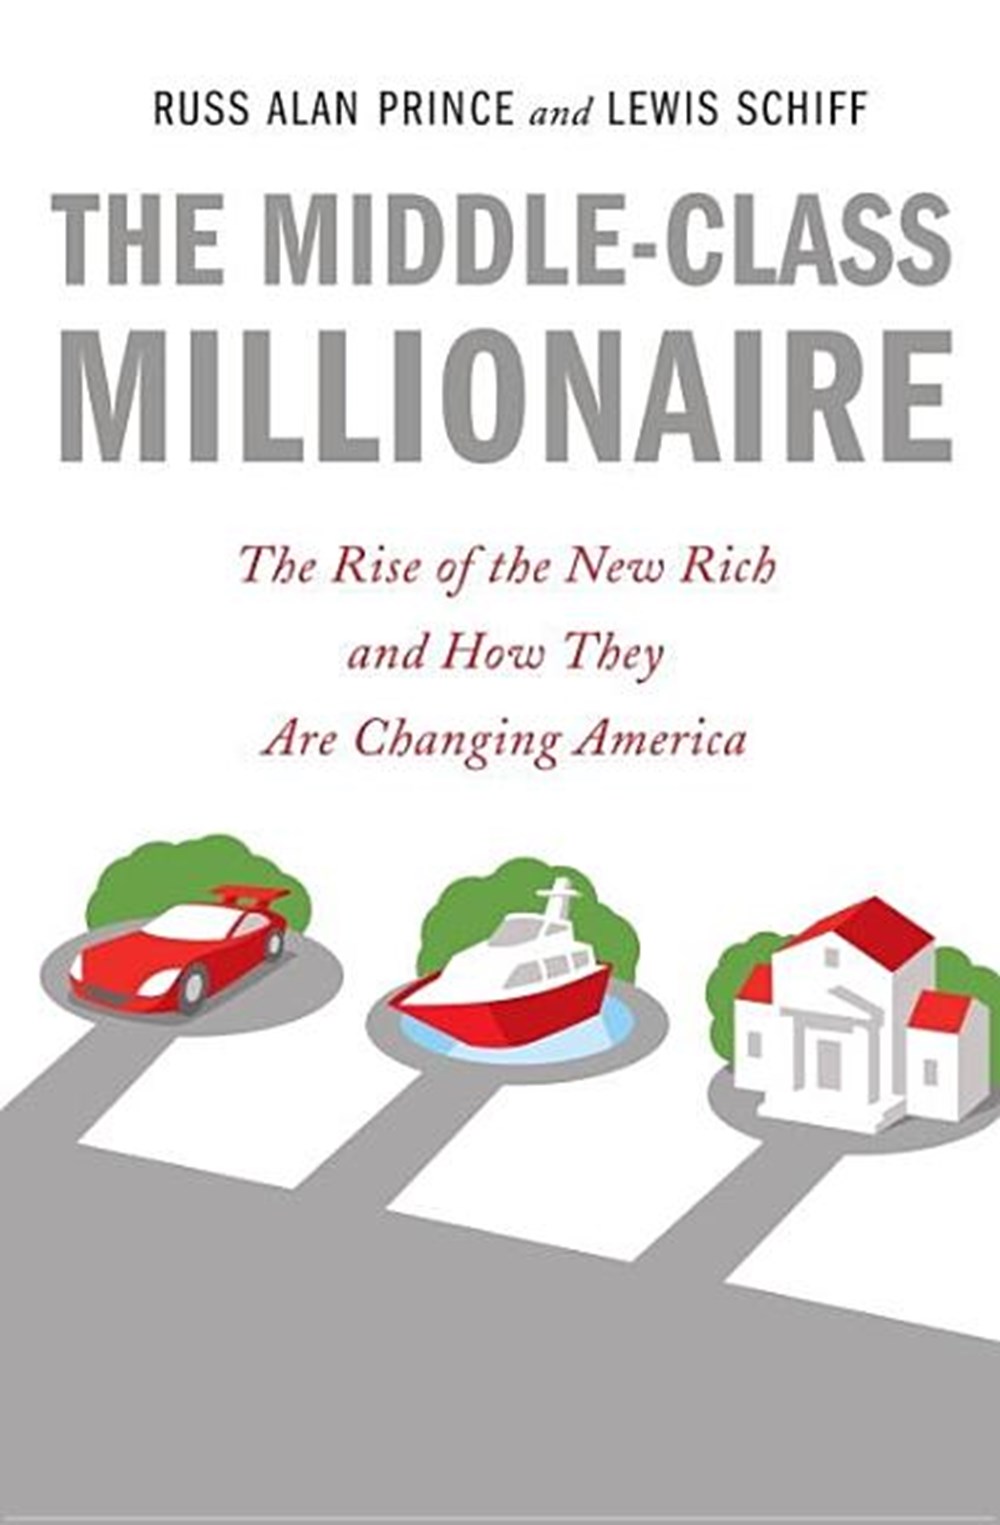 Middle-Class Millionaire The Rise of the New Rich and How They Are Changing America